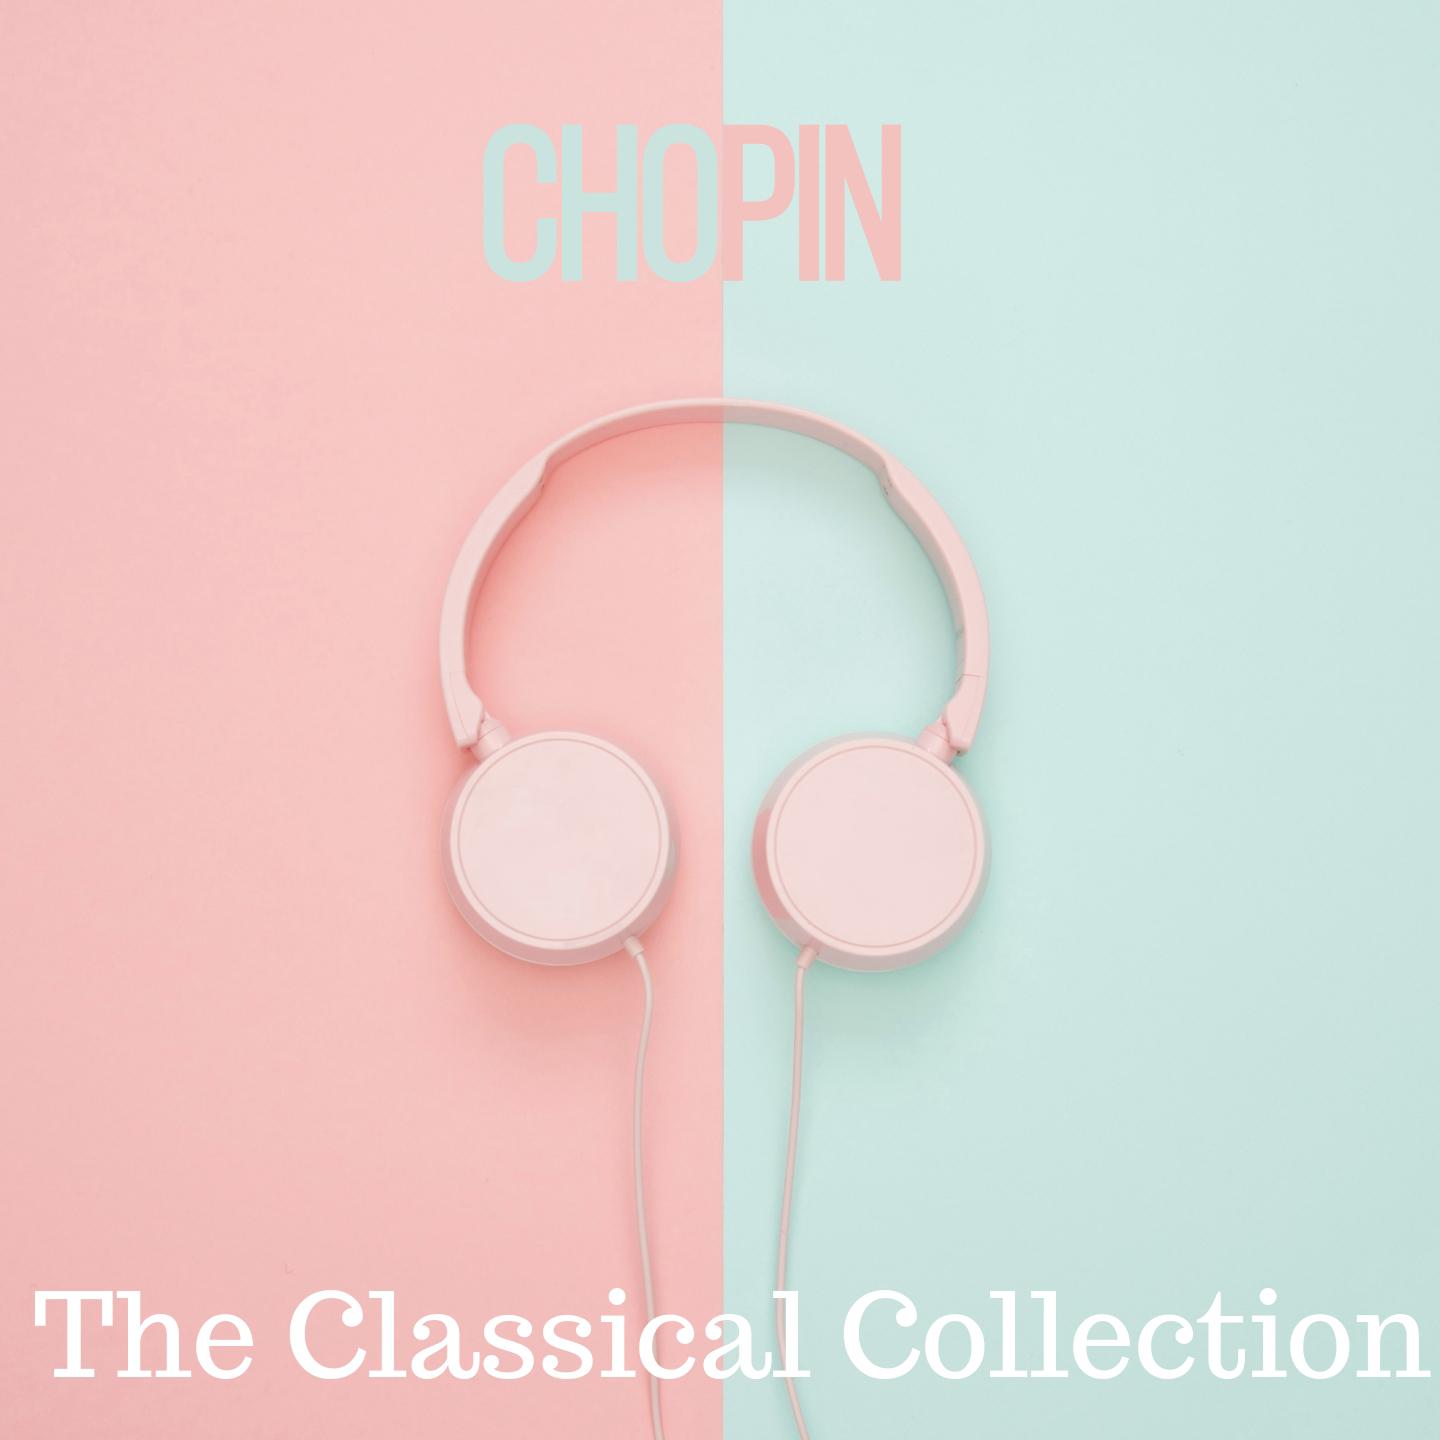 Chopin (The Classical Collection)